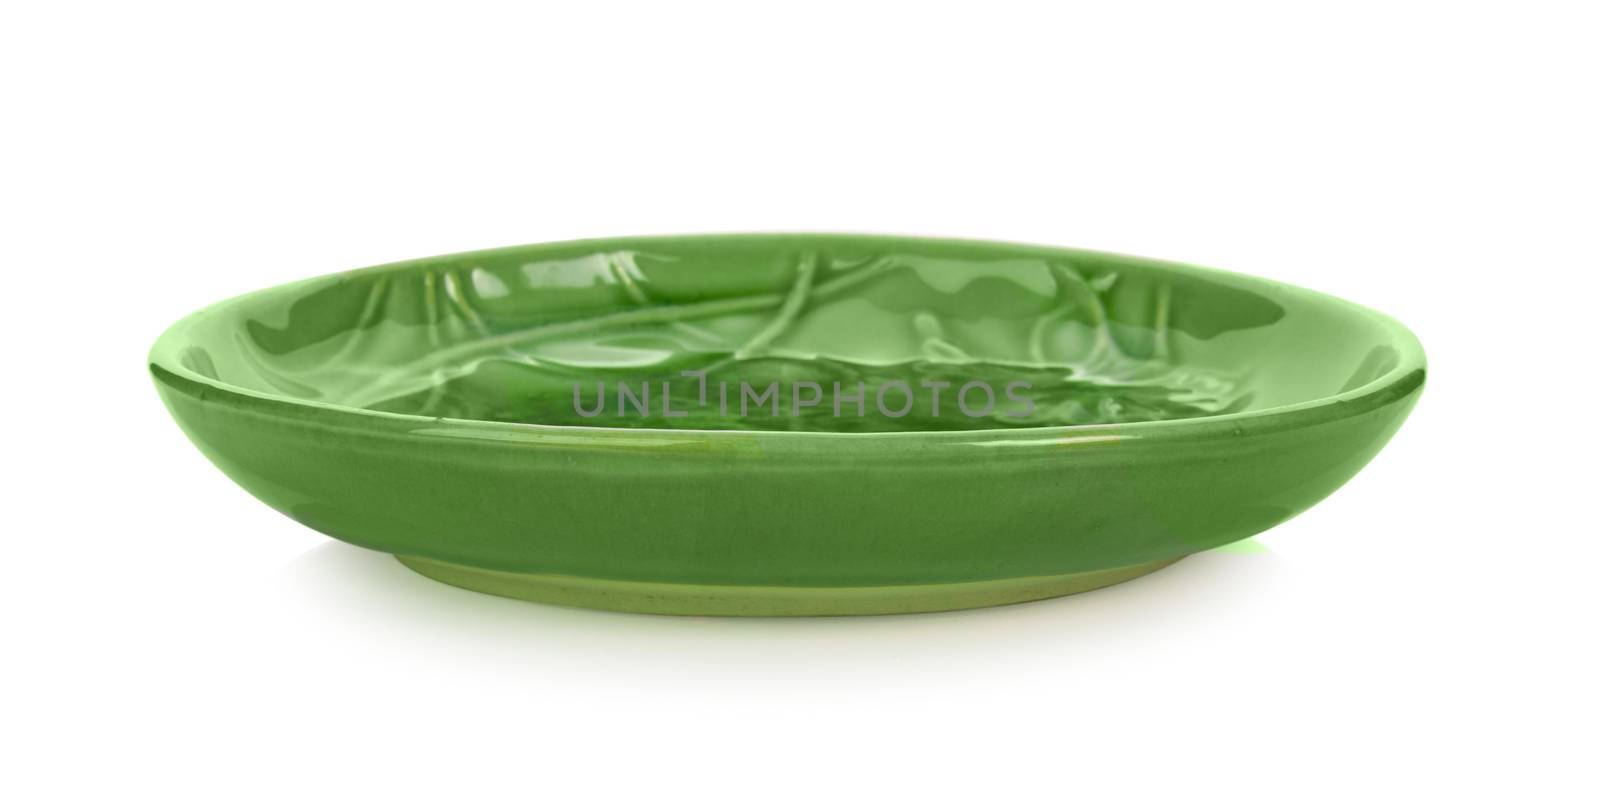 green ceramic plate on white background